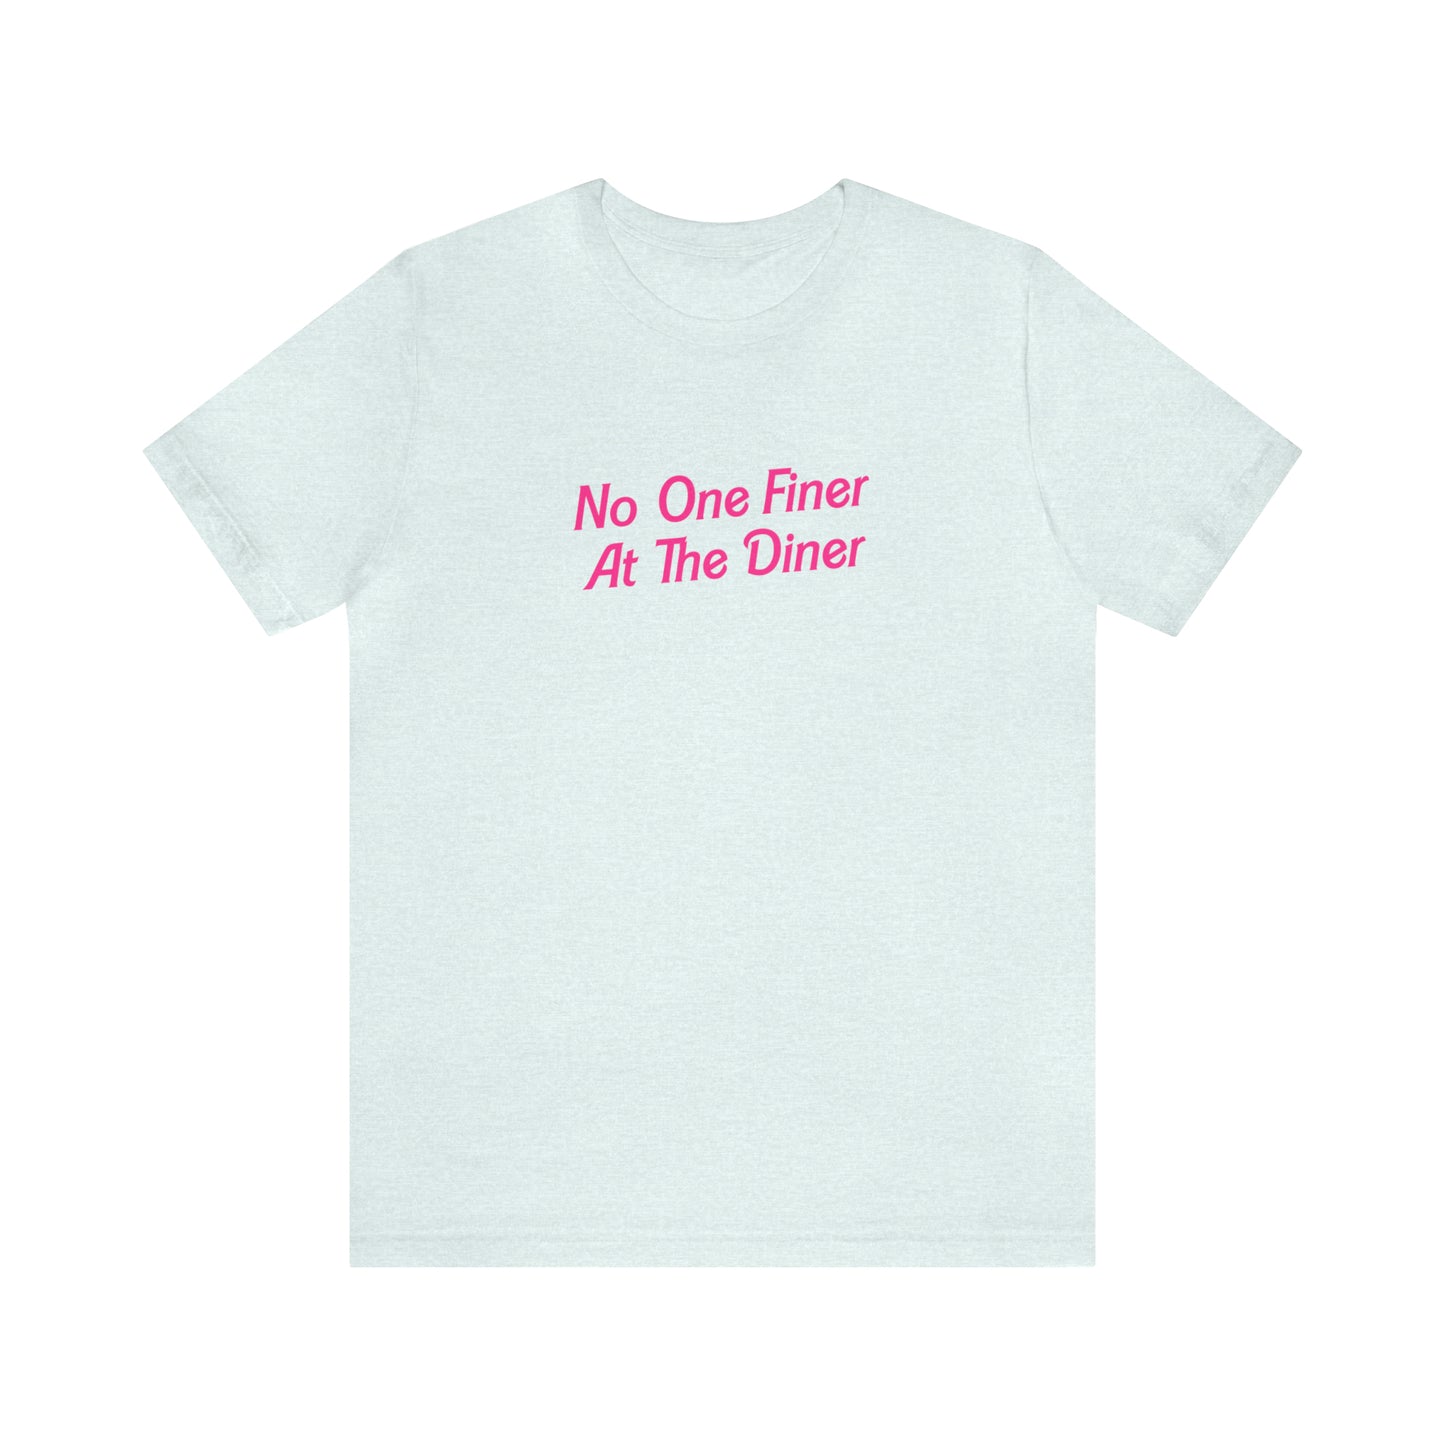 No One Finer At The Diner Tee